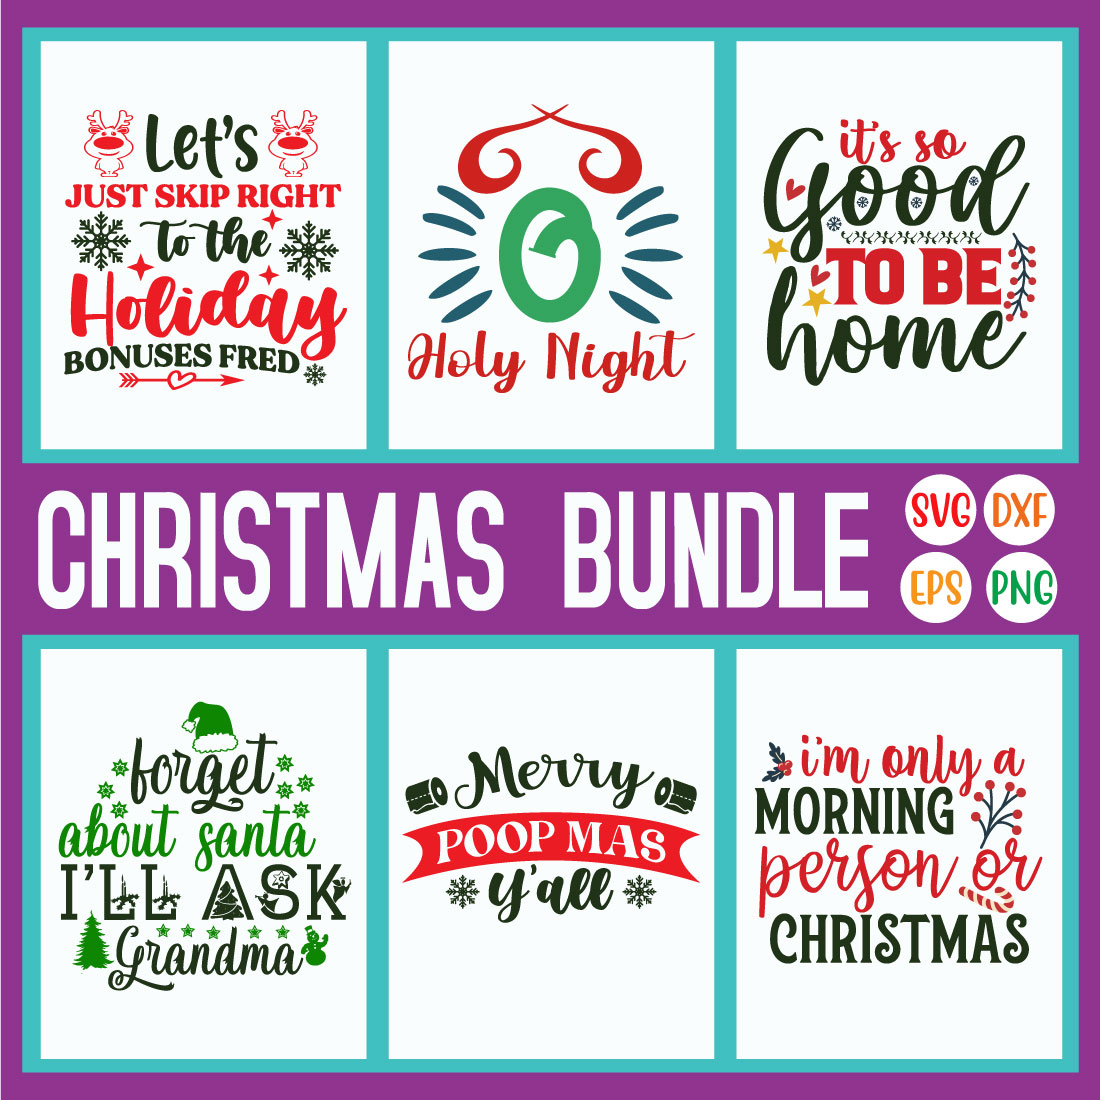 Funny Christmas Quotes Bundle Vol77 cover image.